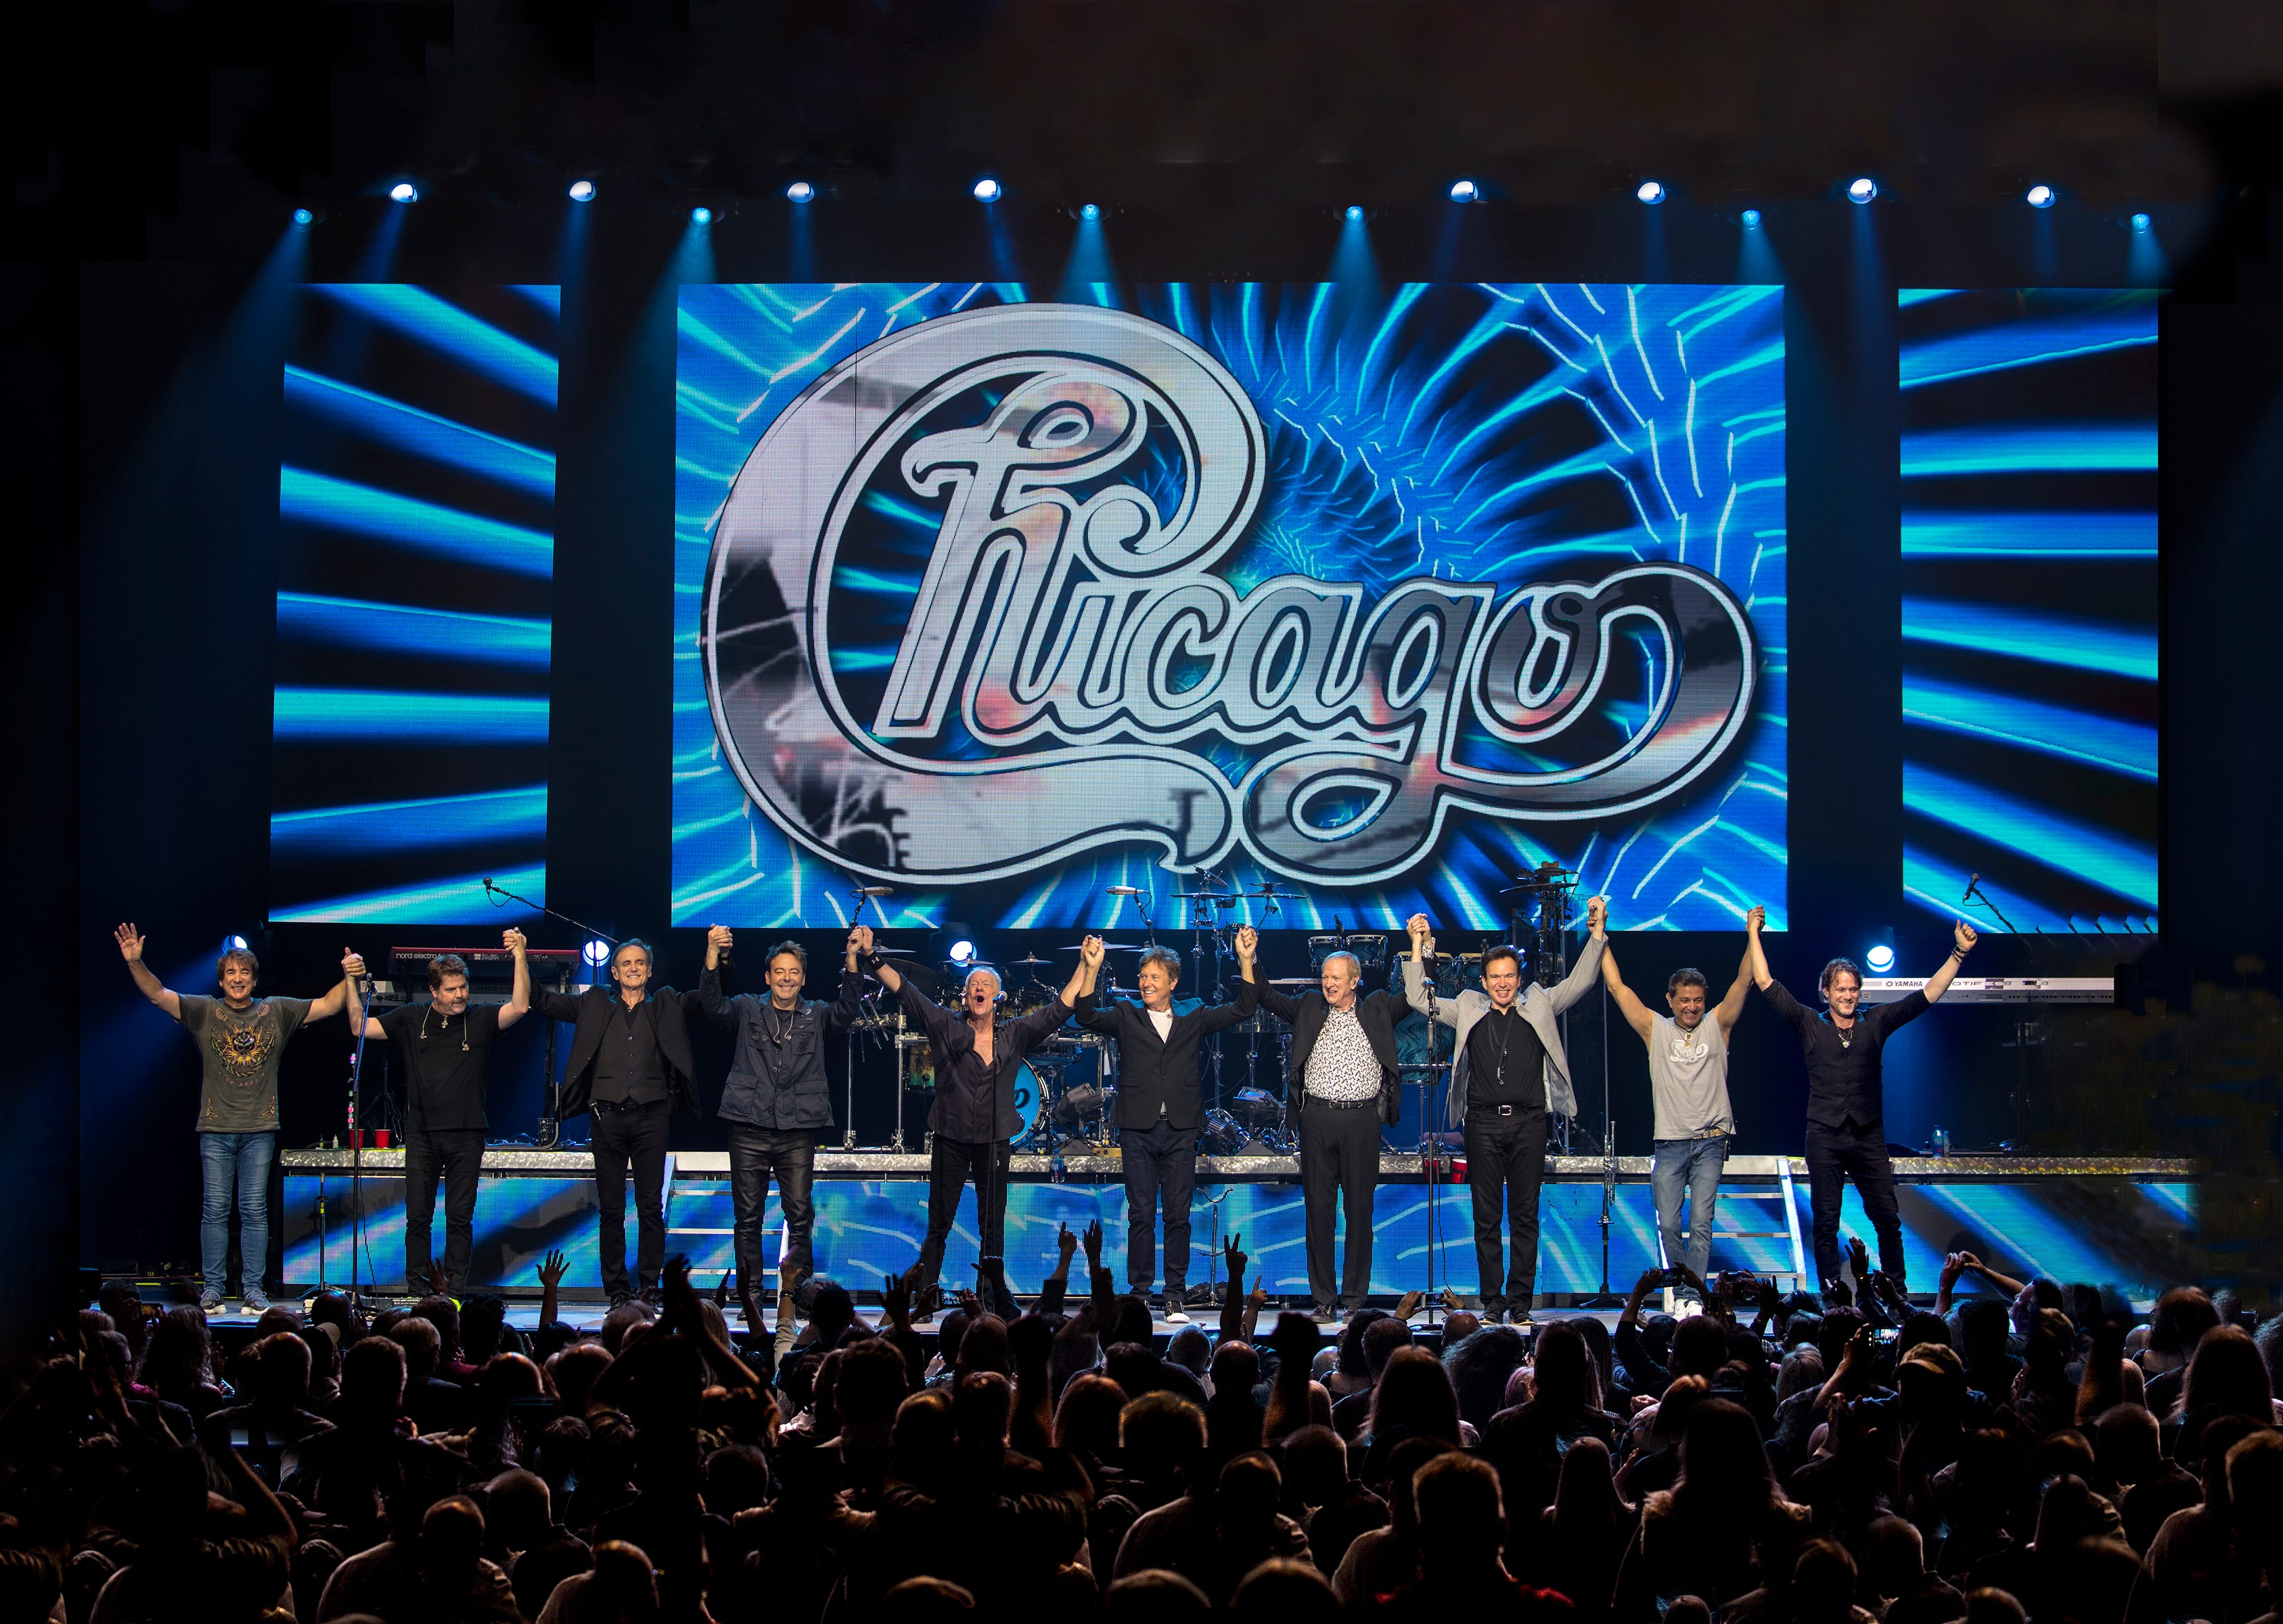 Chicago to bring greatest hits, new sounds to Columbus' Palace Theatre